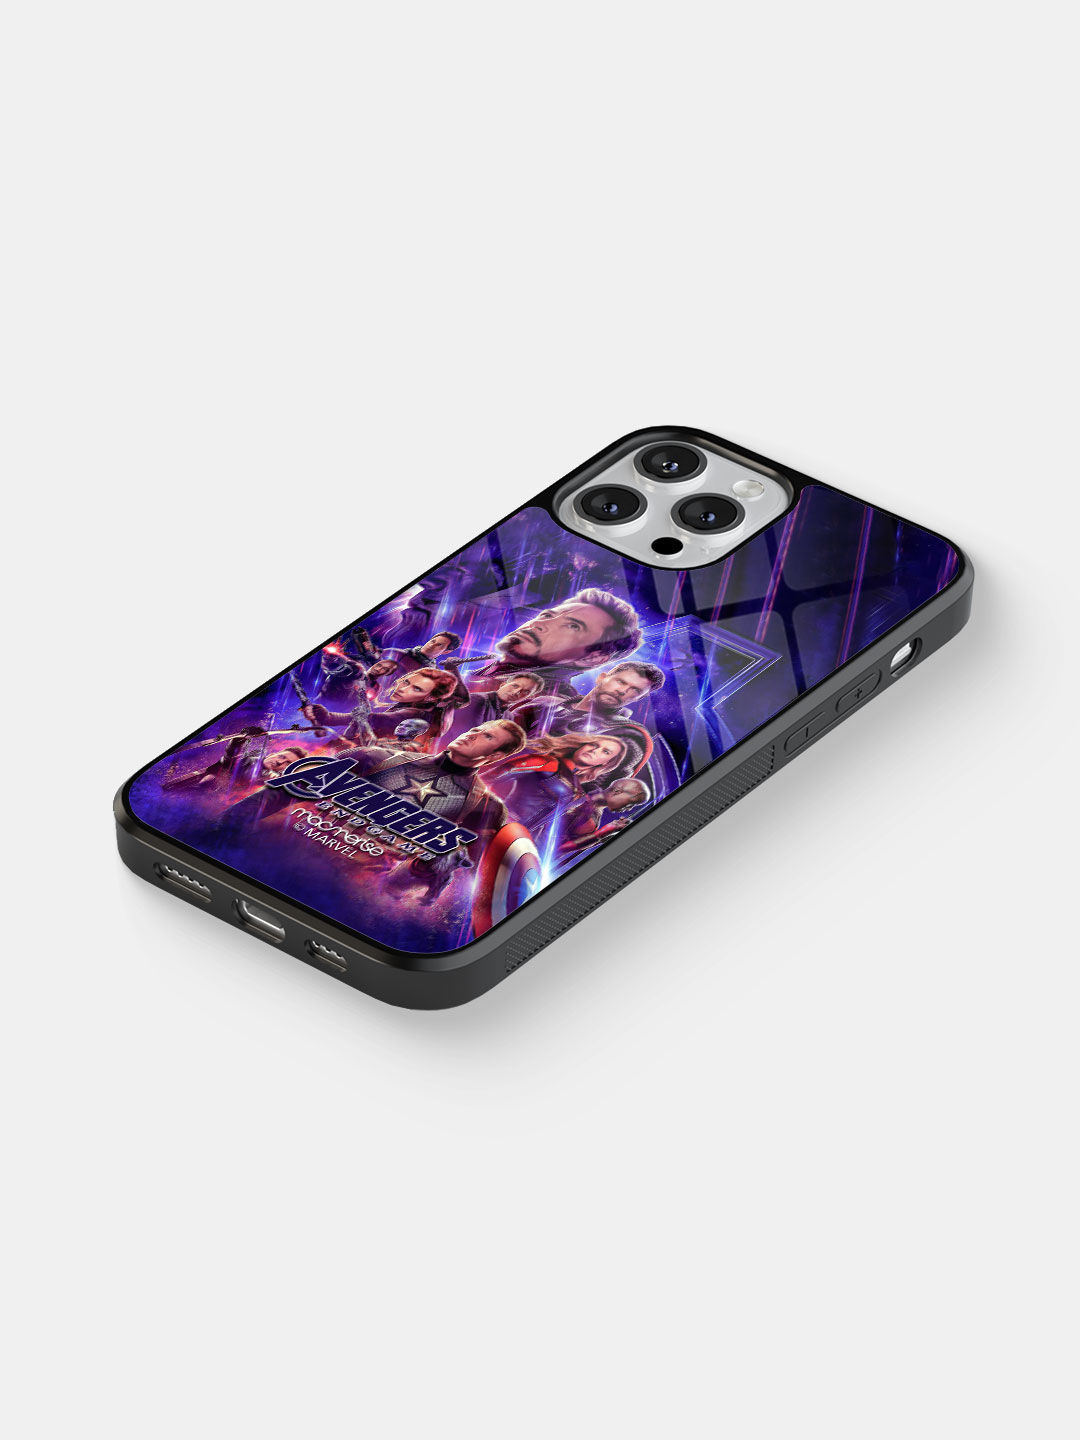 Avengers Endgame Poster - Glass Case For iPhone 13 Pro Max